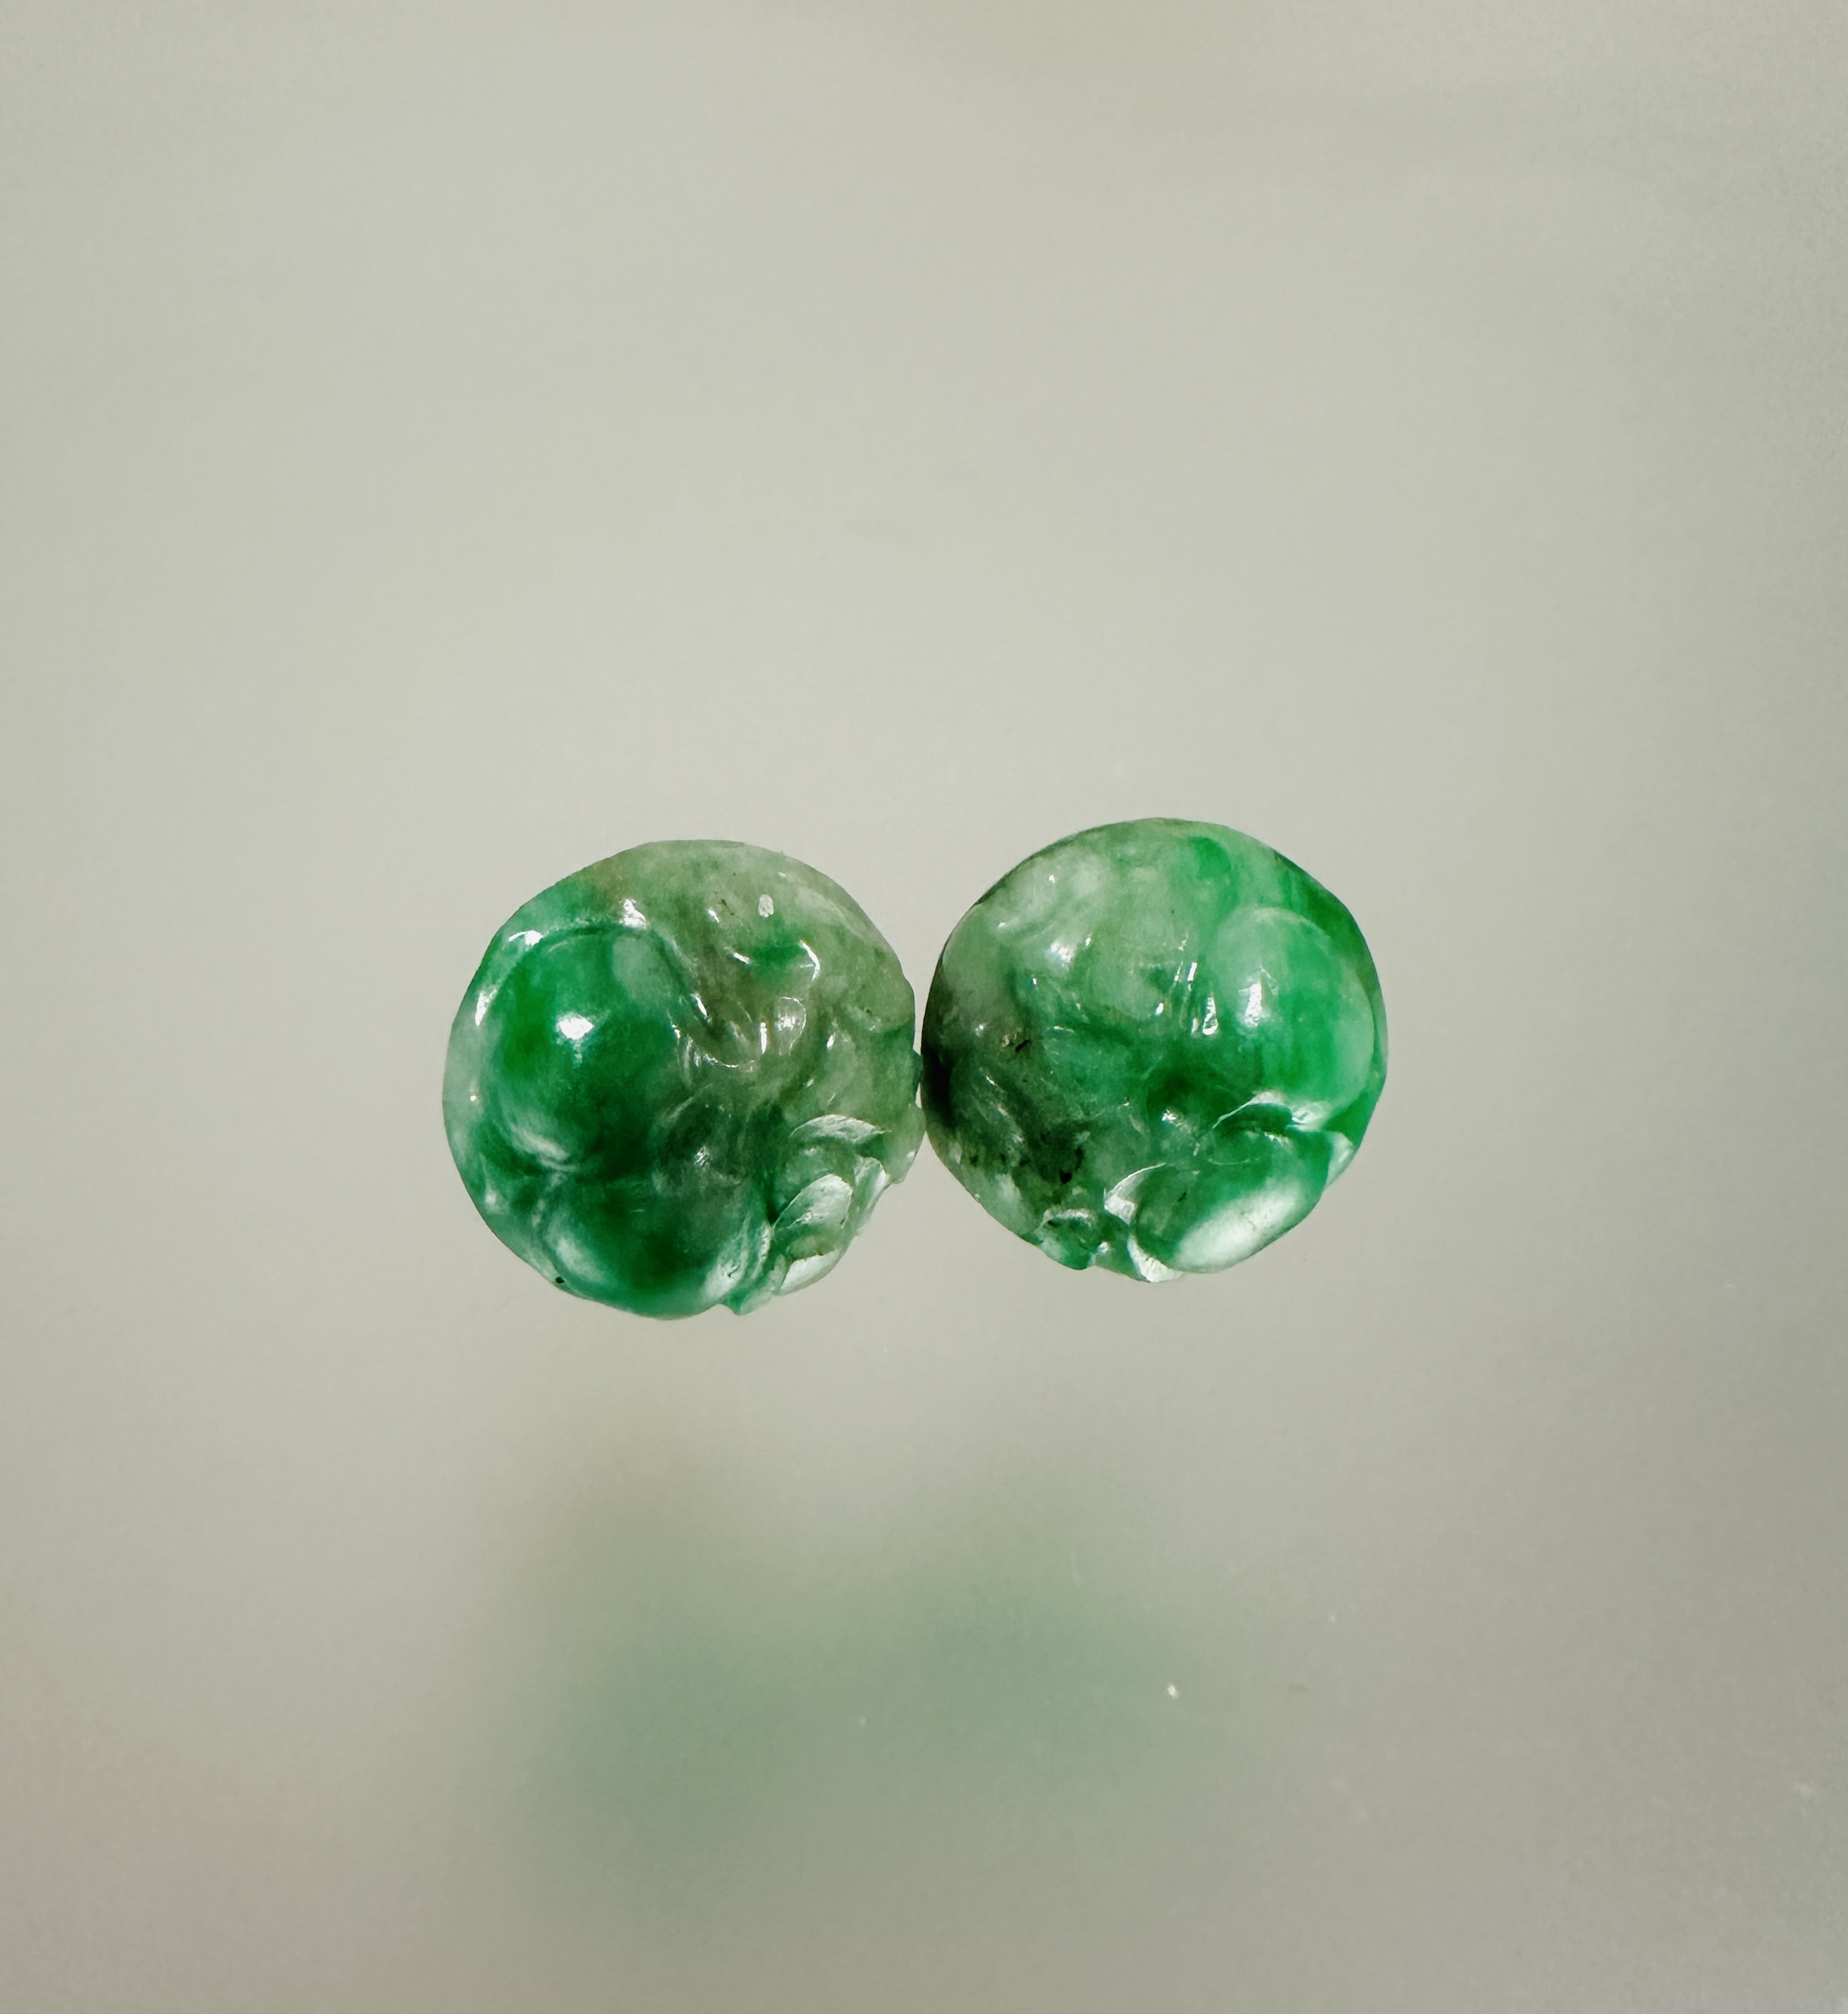 A pair of carved circular celadon jade stud earrings mounted in 18ct white gold D x 1cm 3.52g - Image 3 of 3